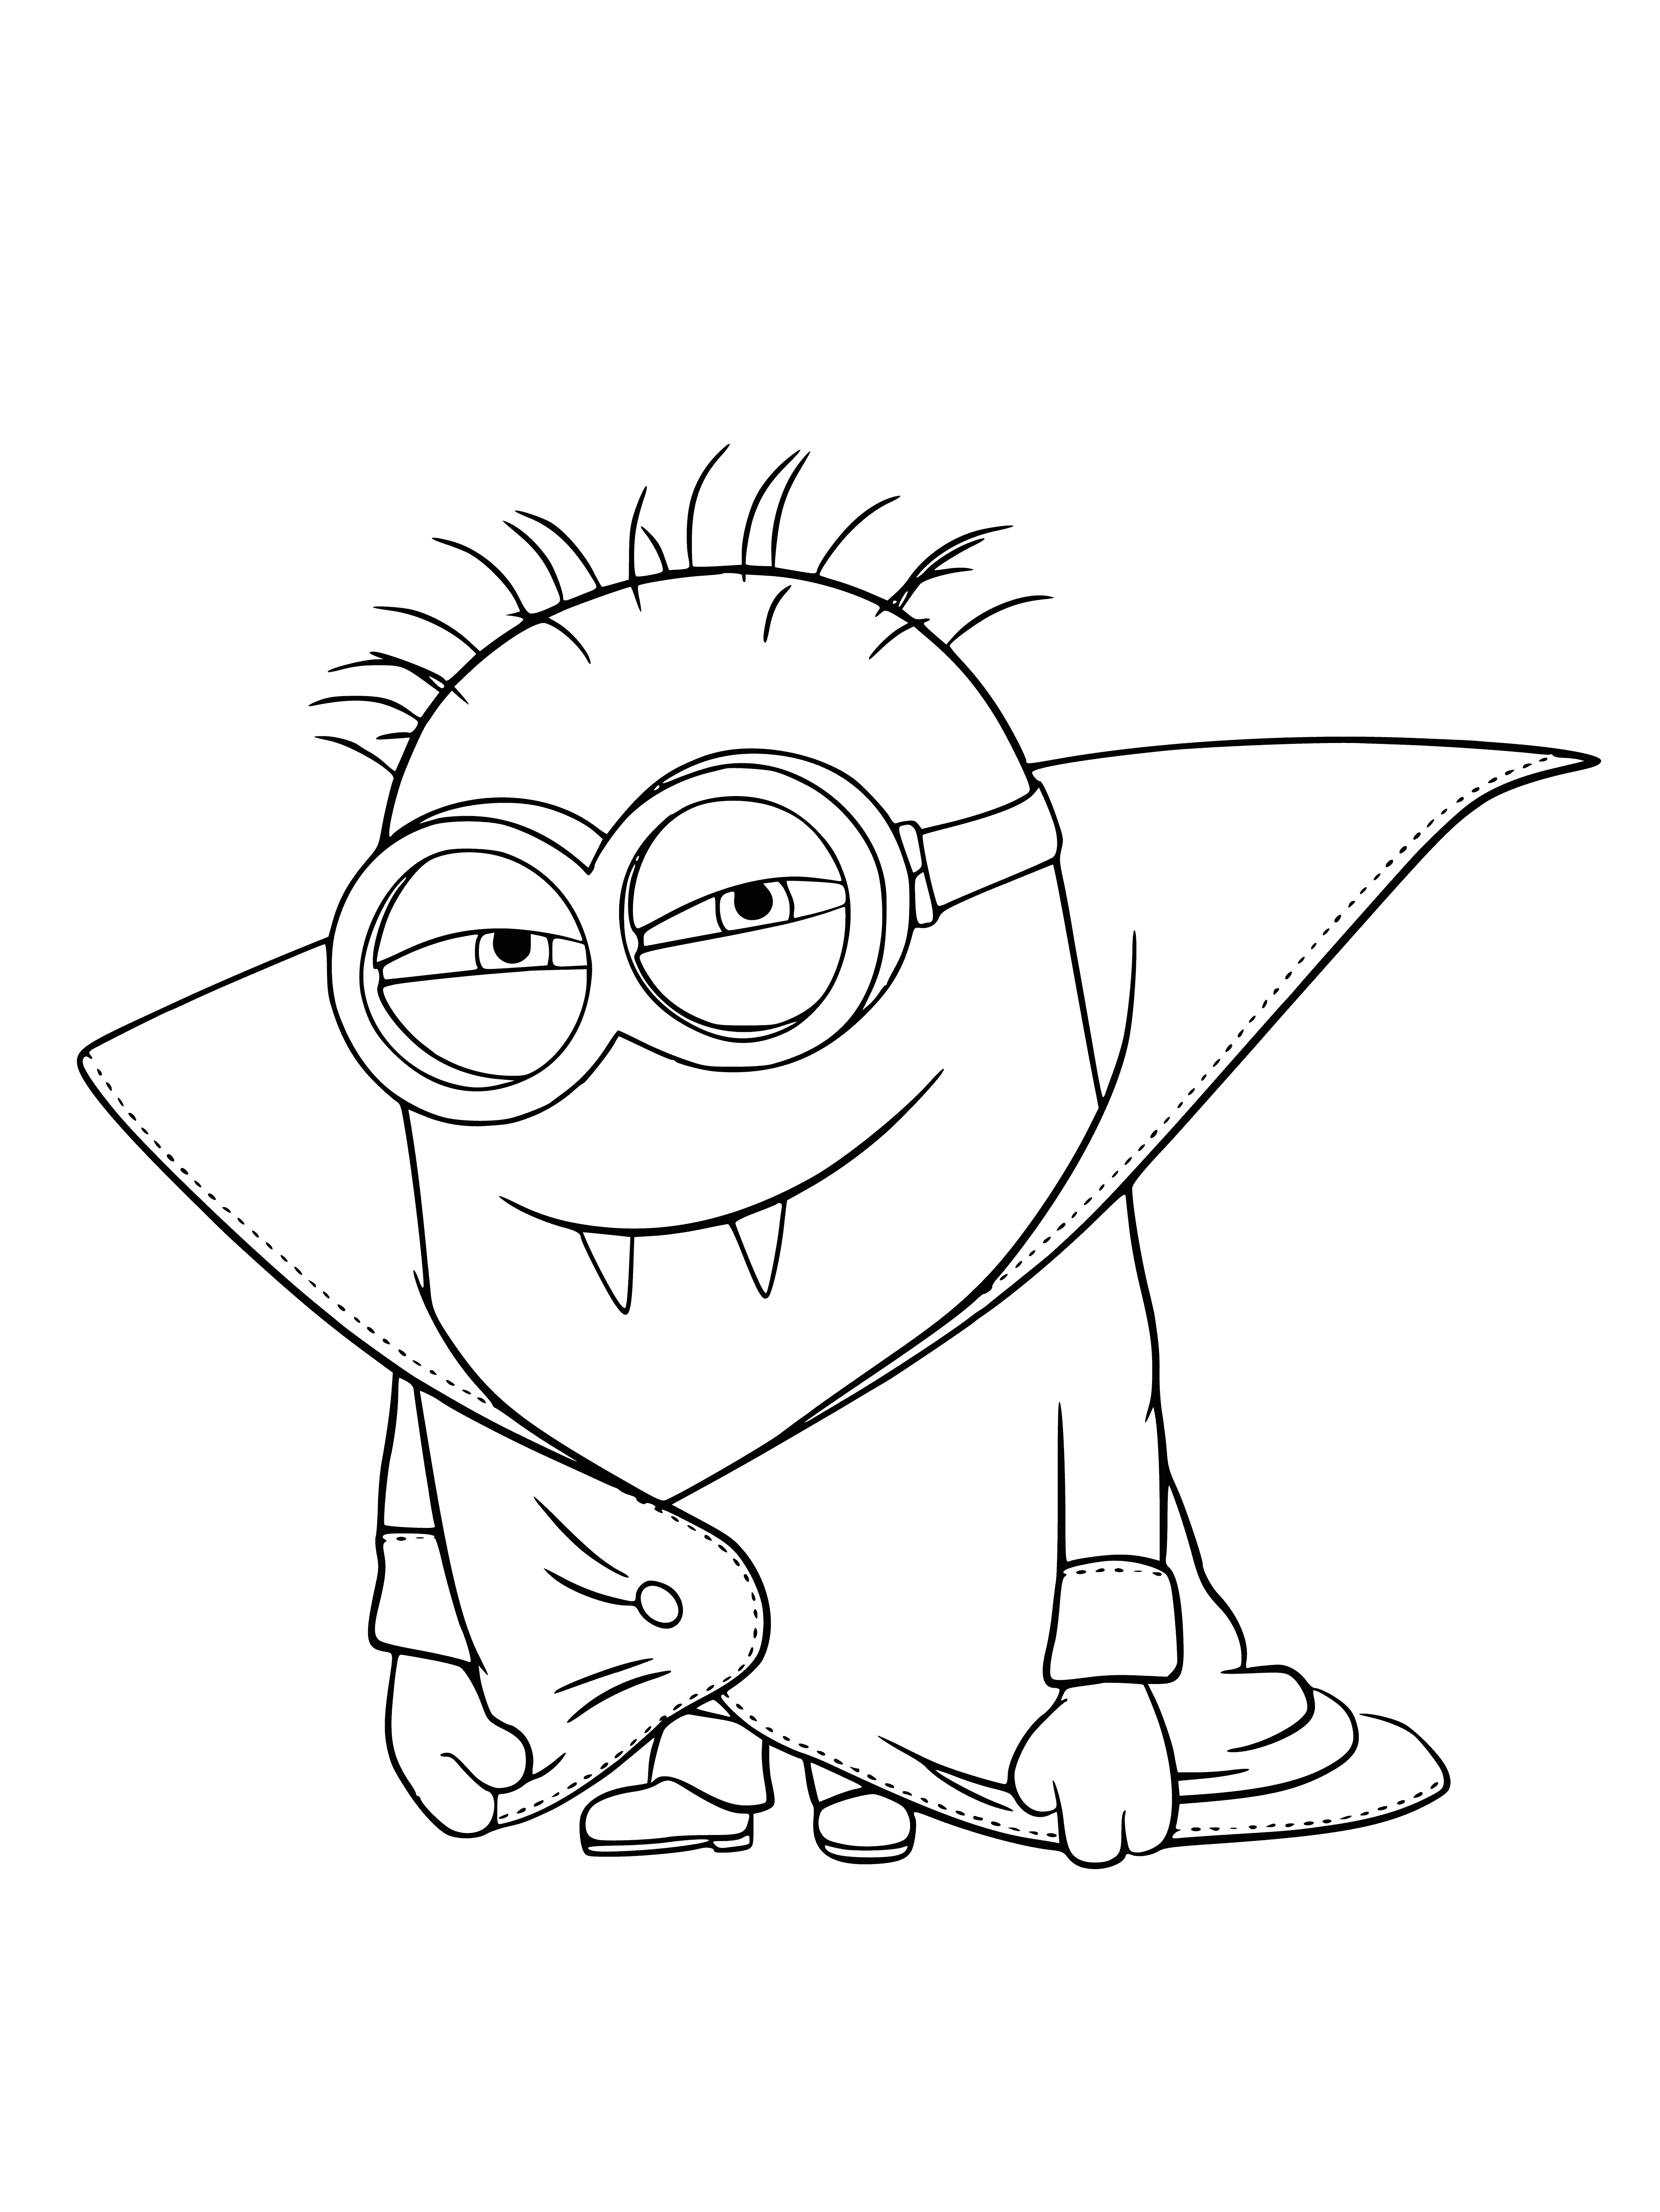 coloring page: Minions - Small, yellow creature with blue eyes and horns, wearing a black cape & holding a sword.